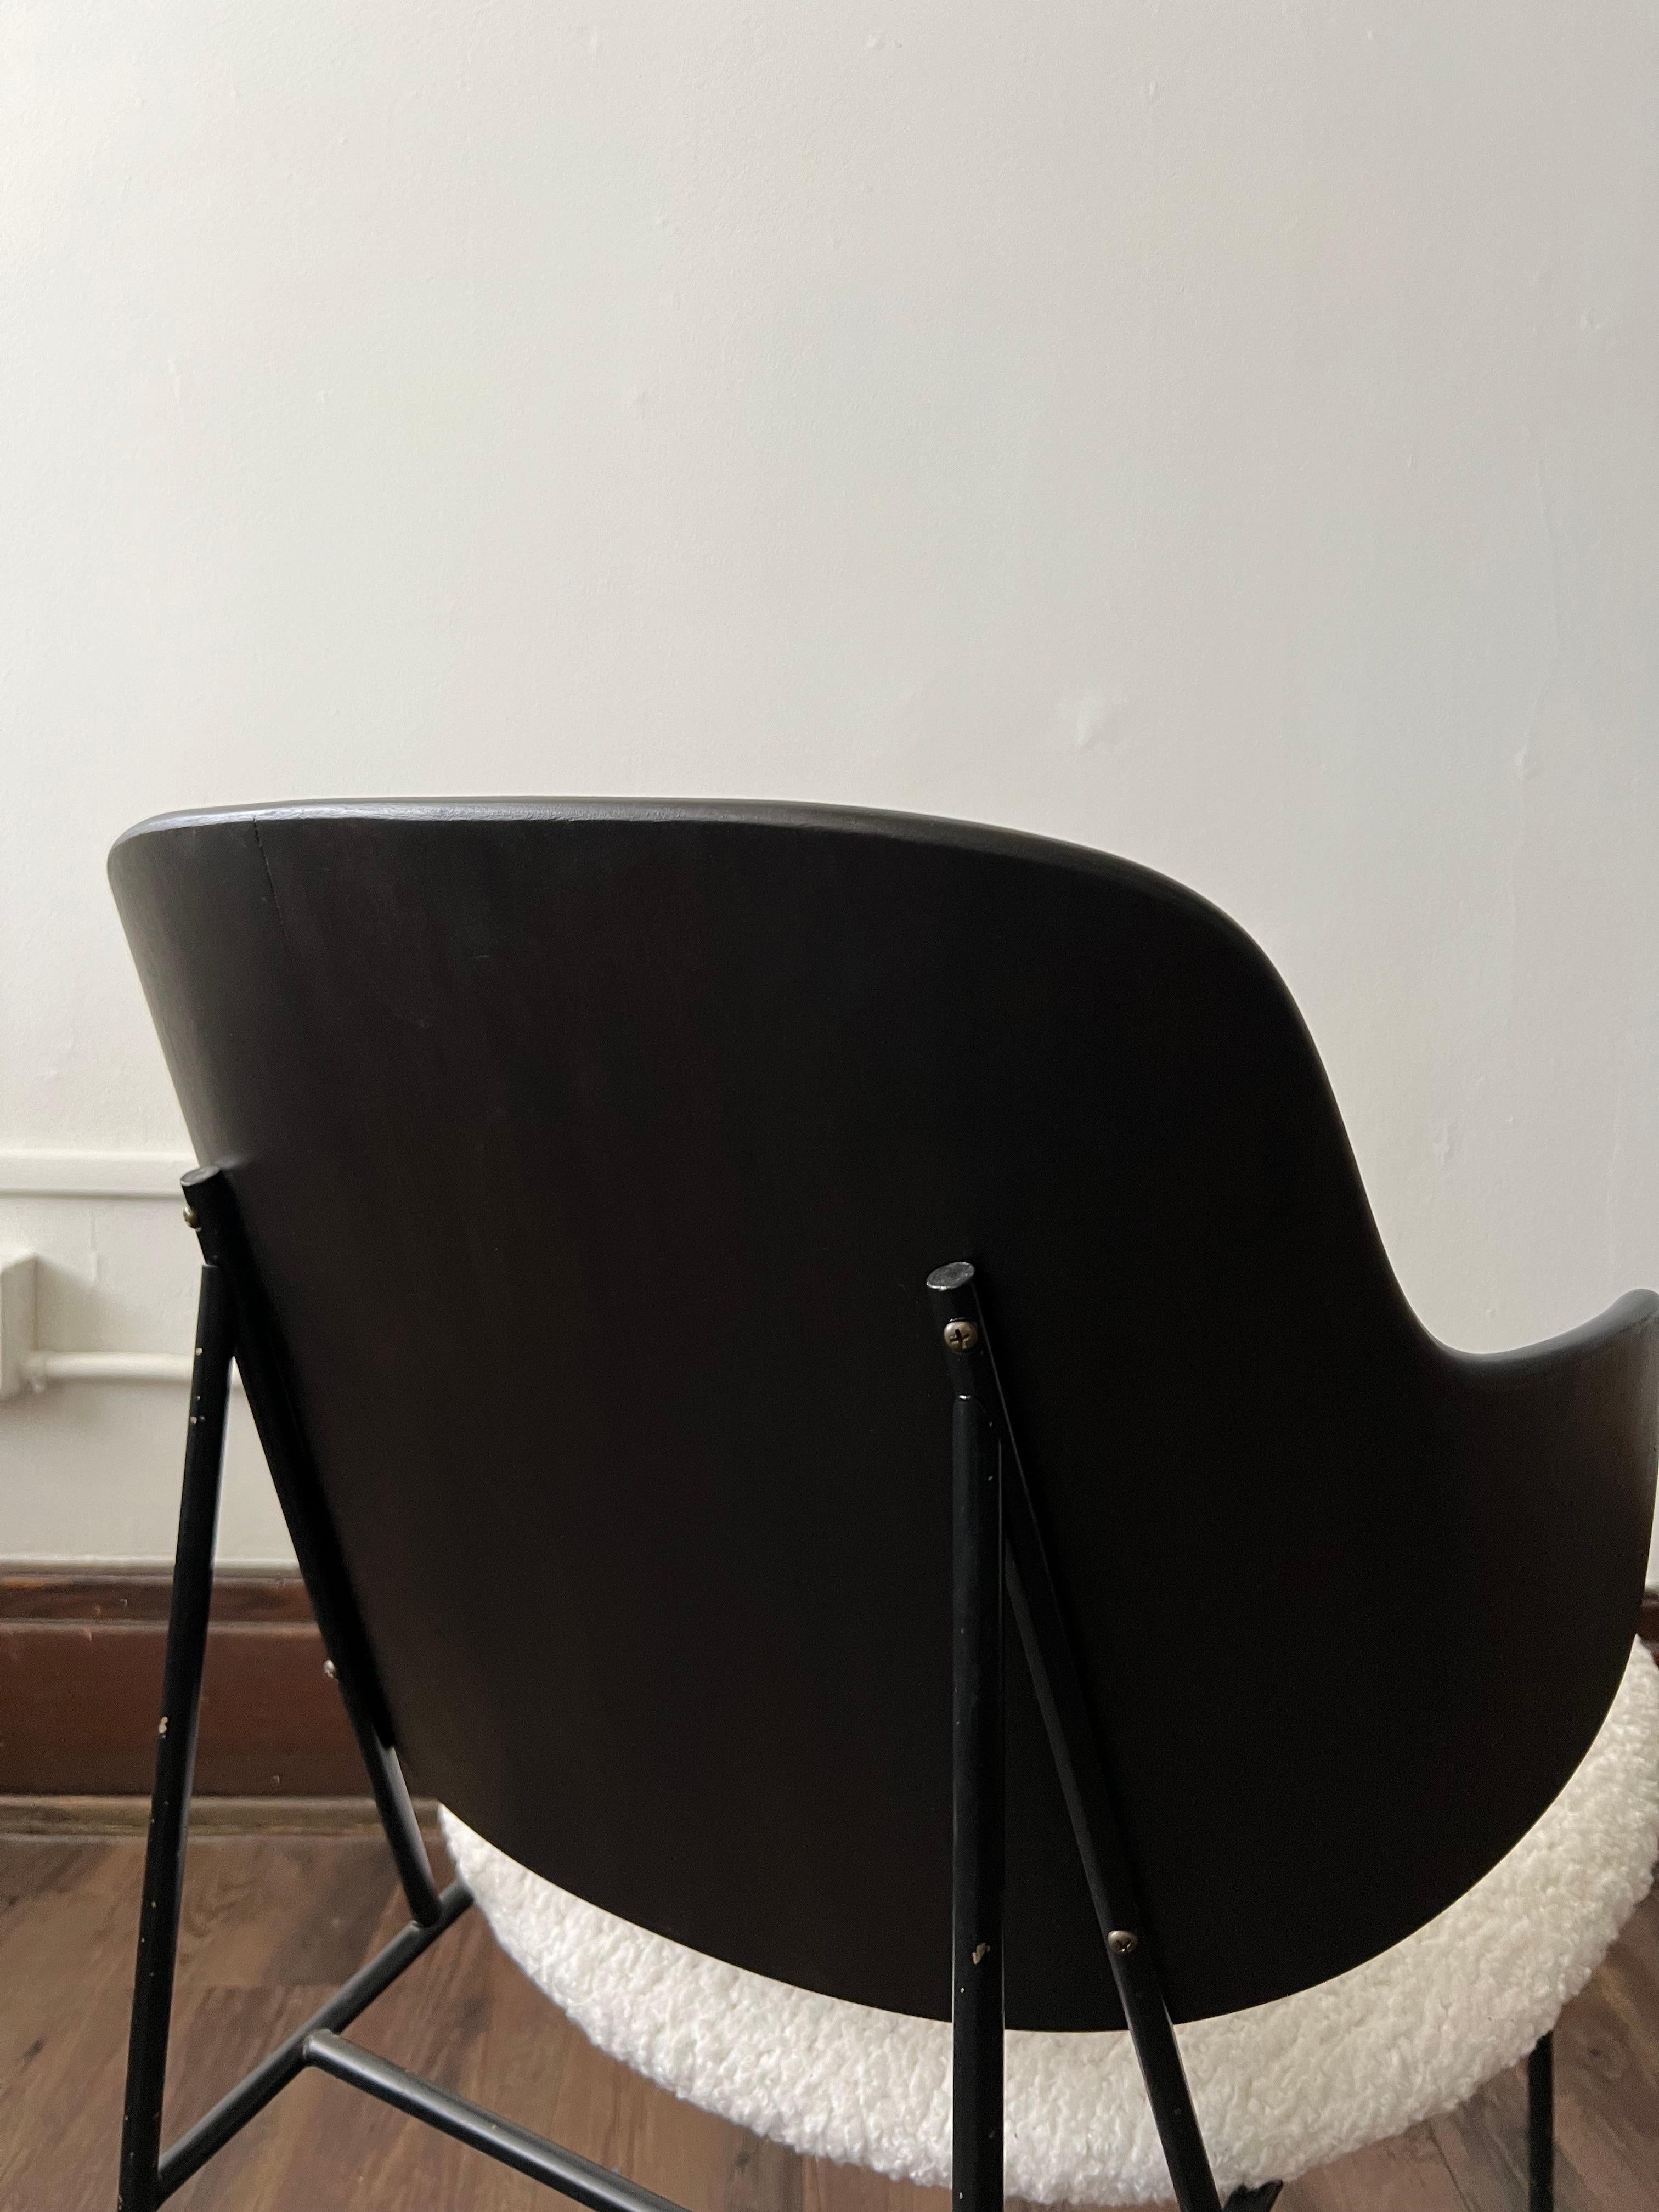 Penguin Lounge Chair by Ib Kofod-Larsen for Selling 3